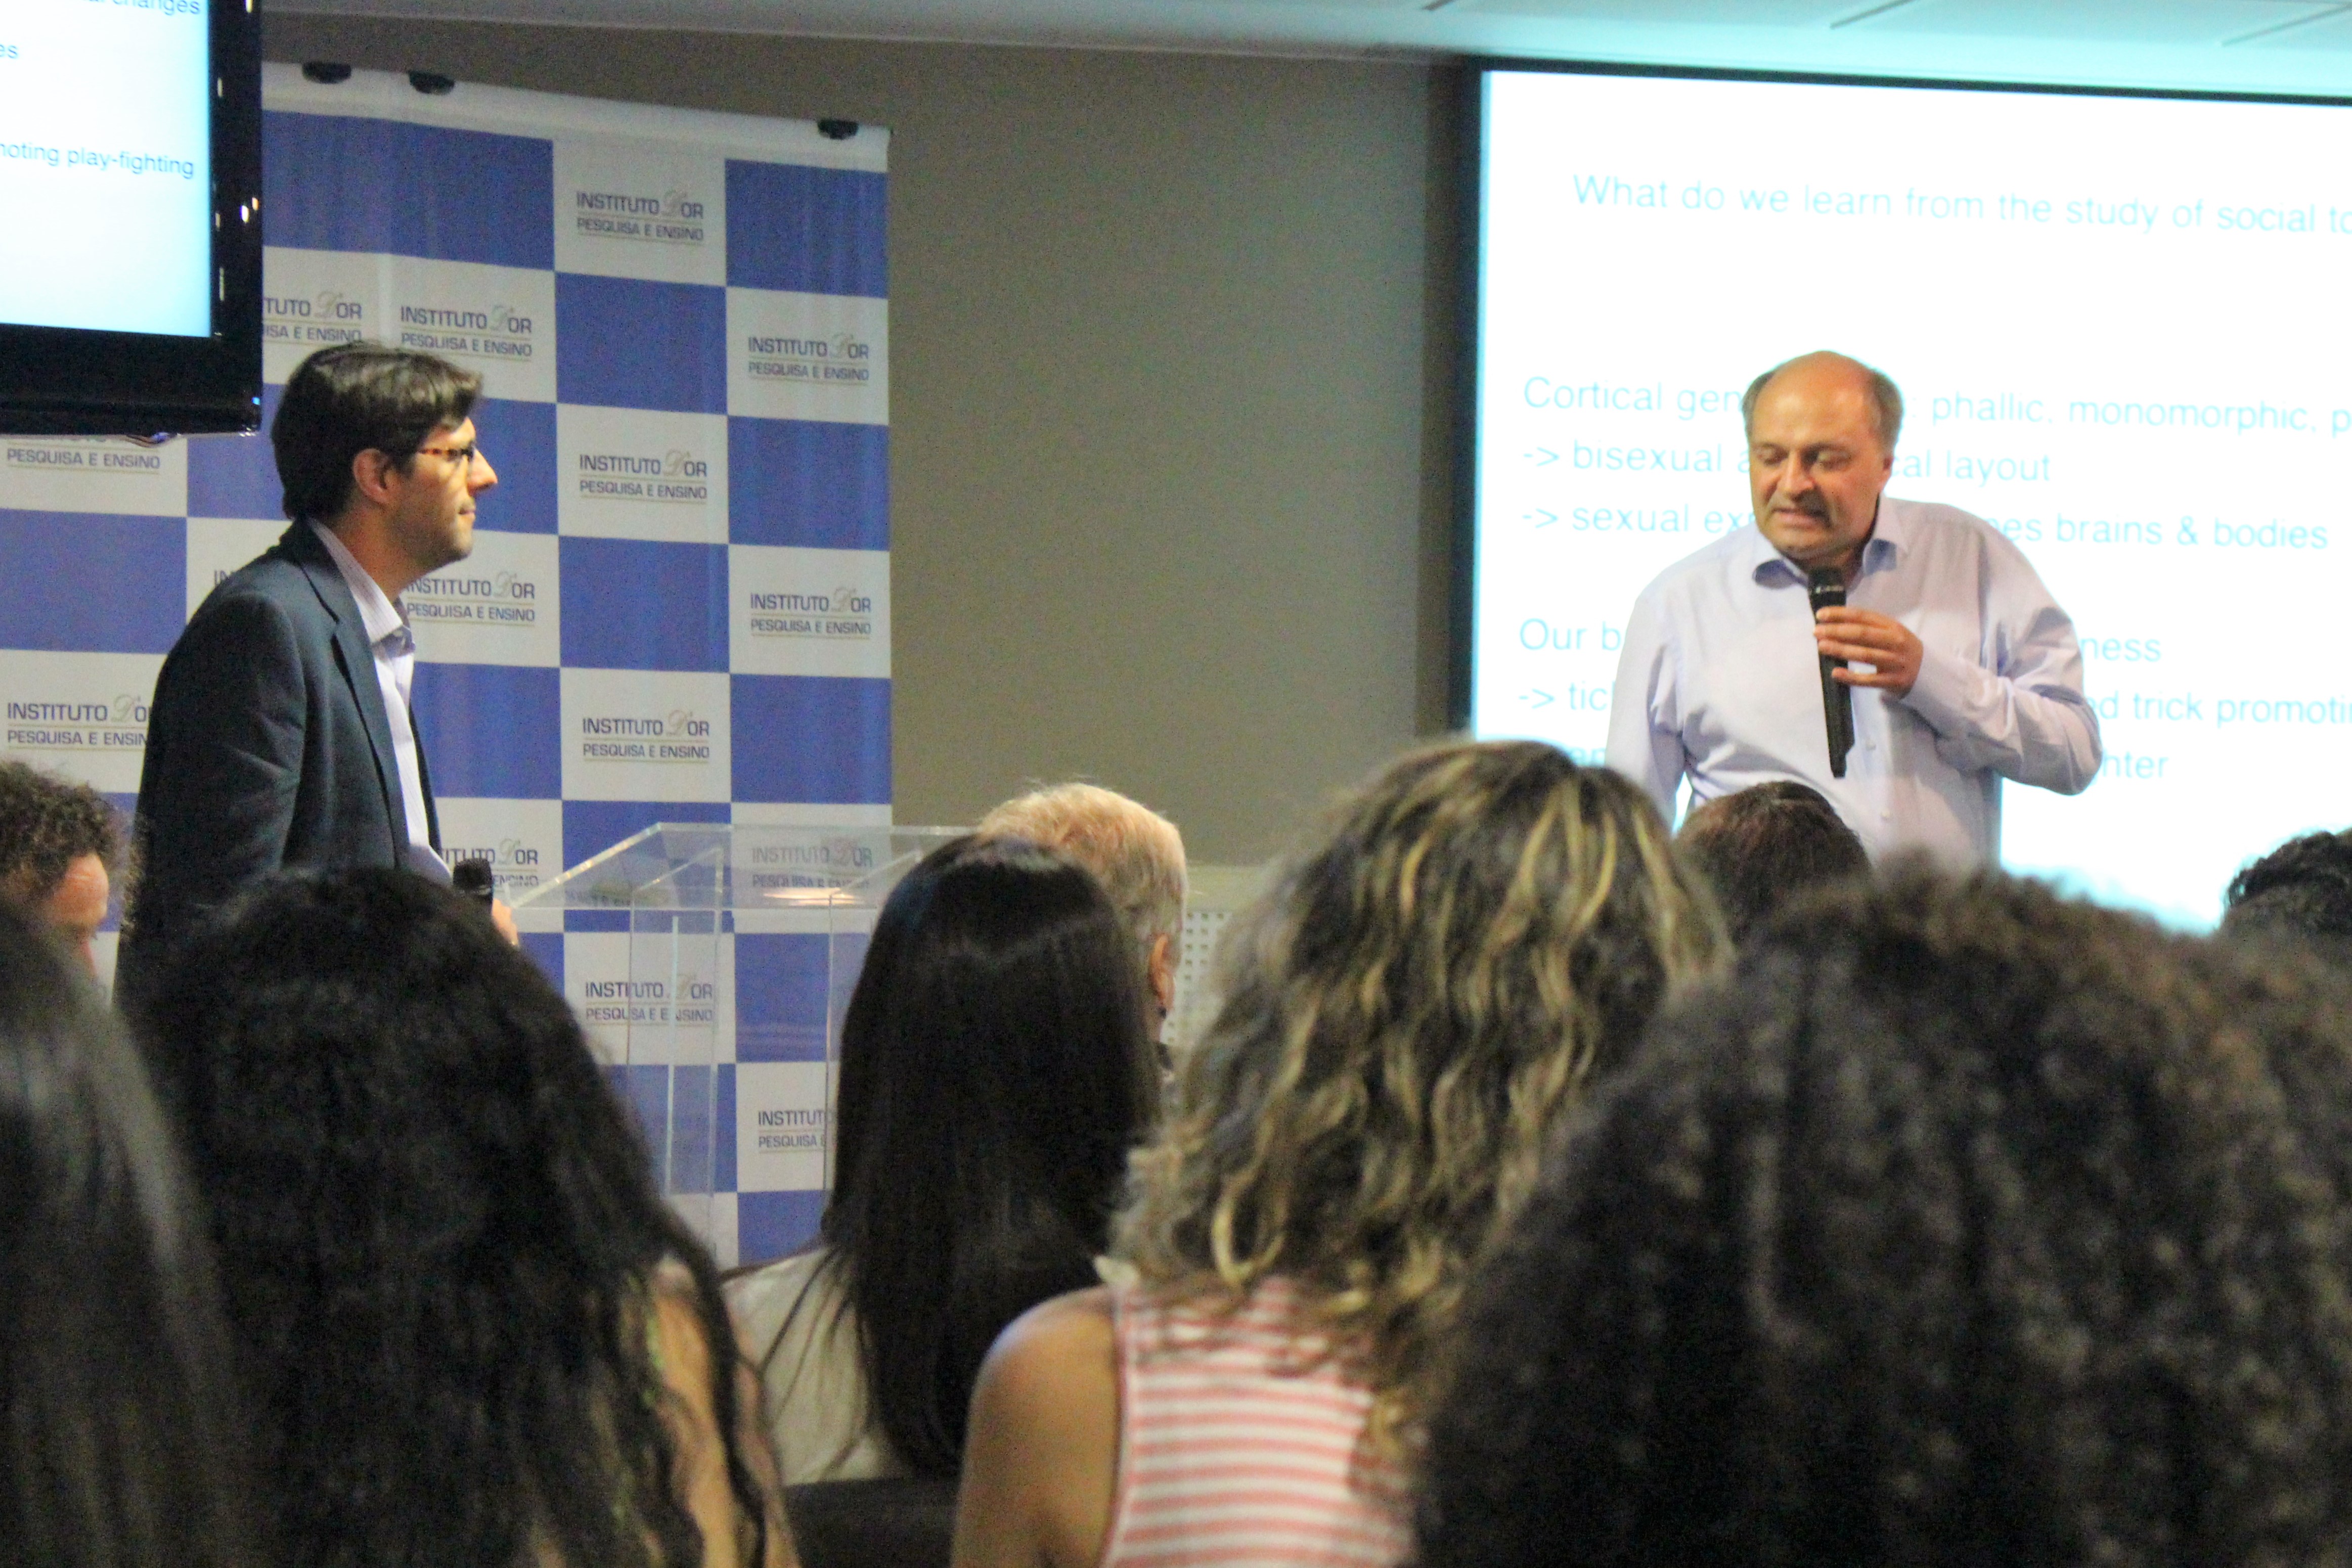 Jorge Moll Neto took part in the closing Q&A session